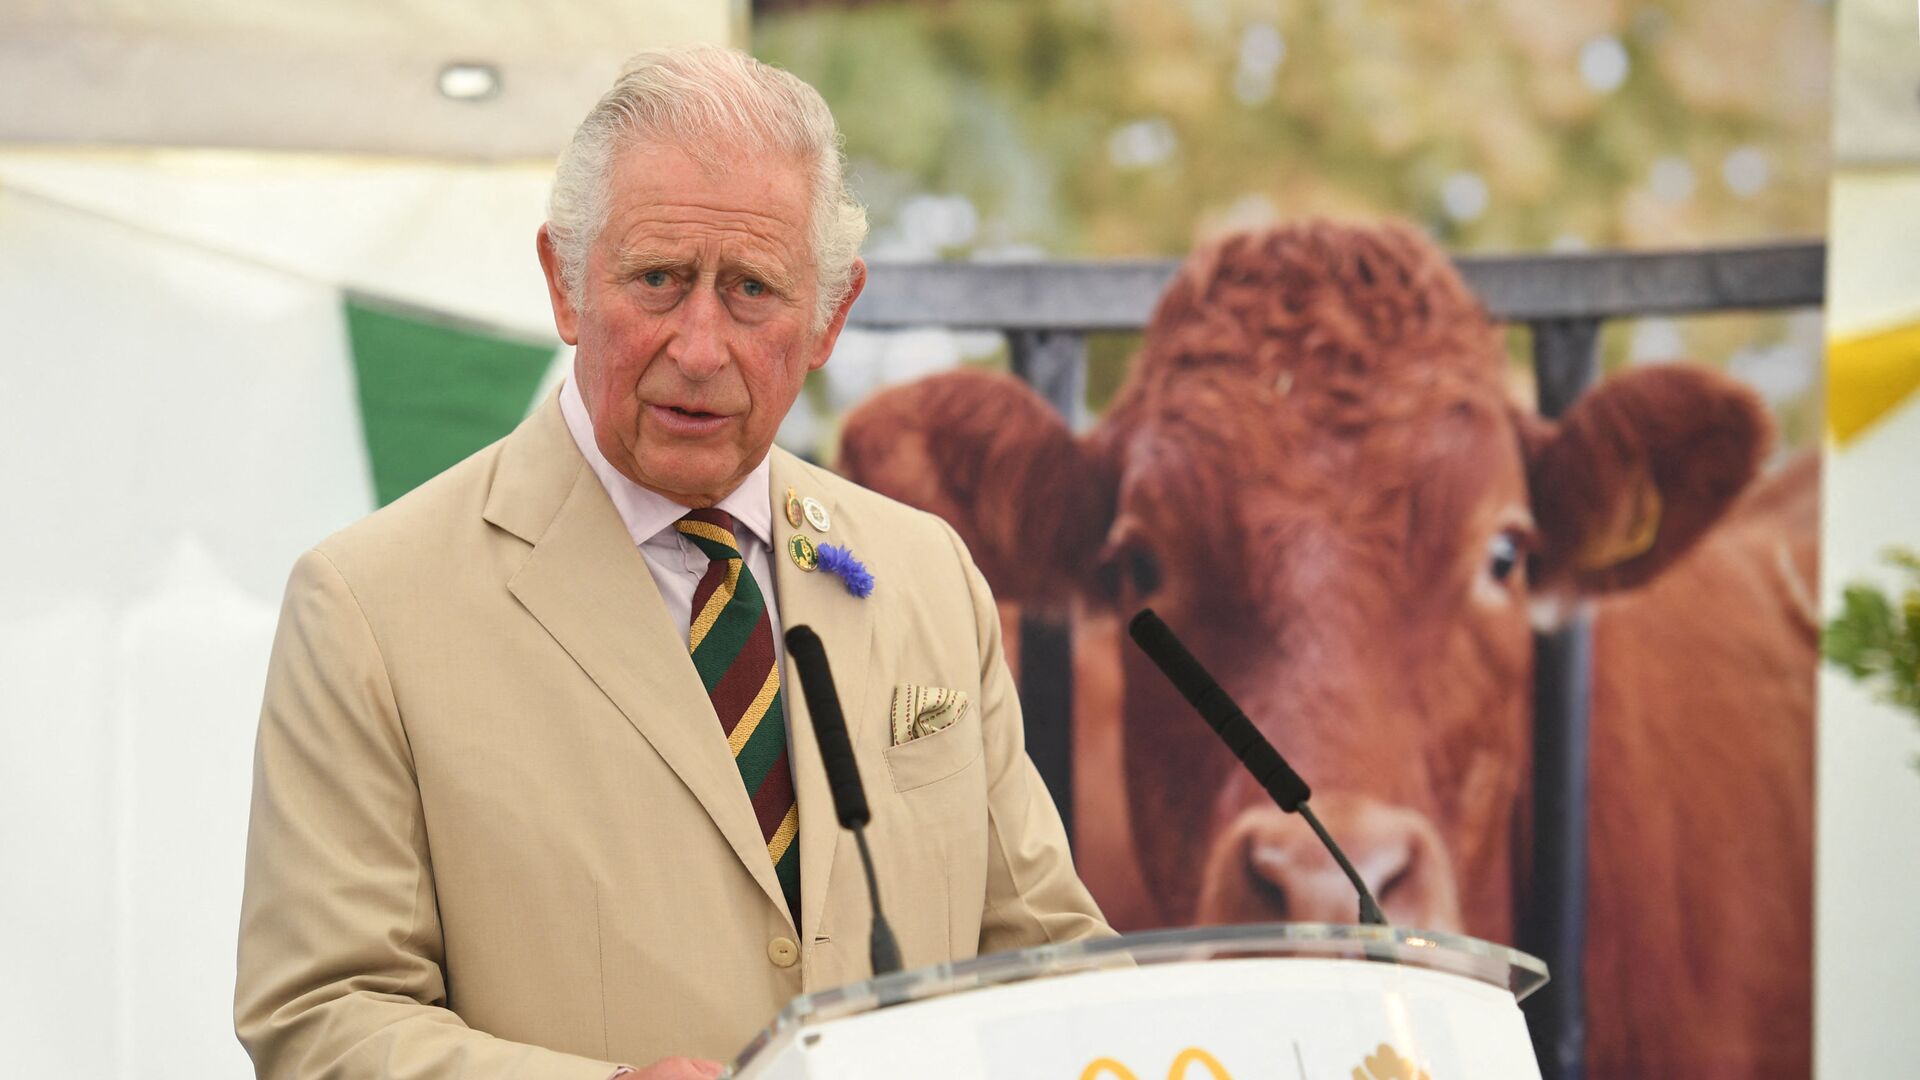 Britain's Prince Charles, Prince of Wales makes a speech during his visit to the Great Yorkshire Show in Harrogate, northern England on July 15, 2021. - Sputnik International, 1920, 06.04.2022